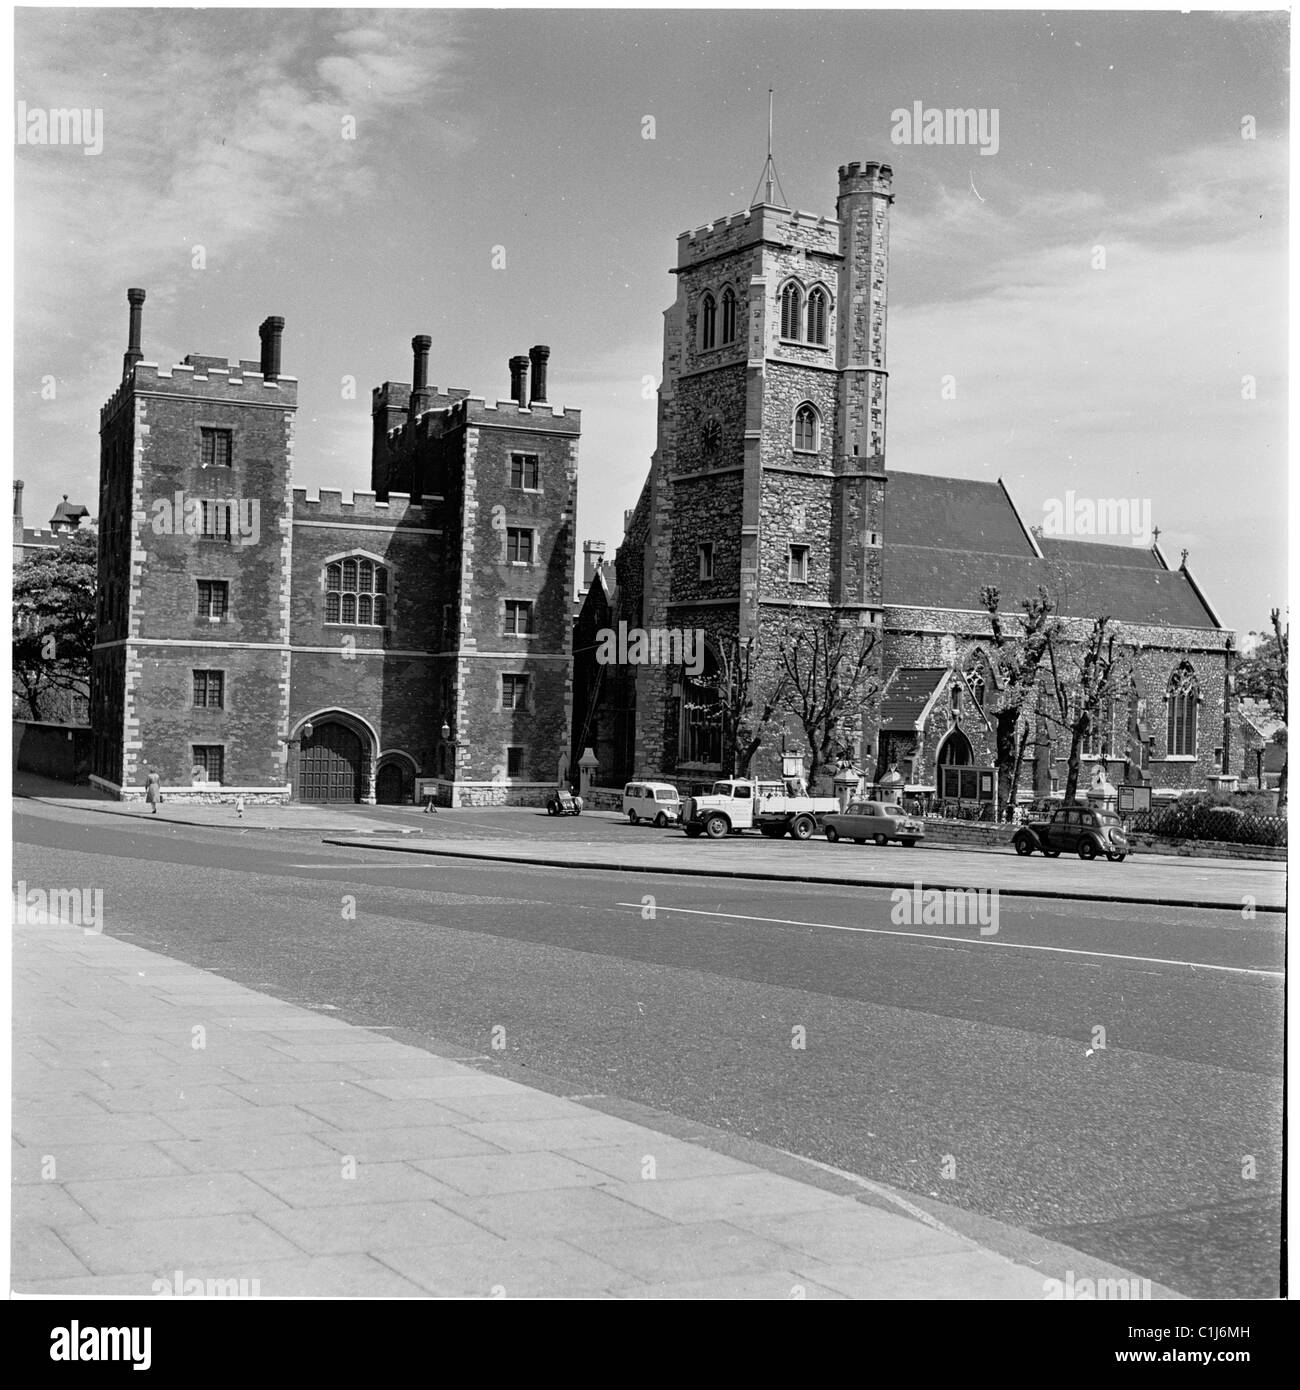 1950s, Lambeth Palace, the Official London residence of the Archbishop of Canterbury, located by the River Thames, Lambeth Palace Rd, London, England. Stock Photo